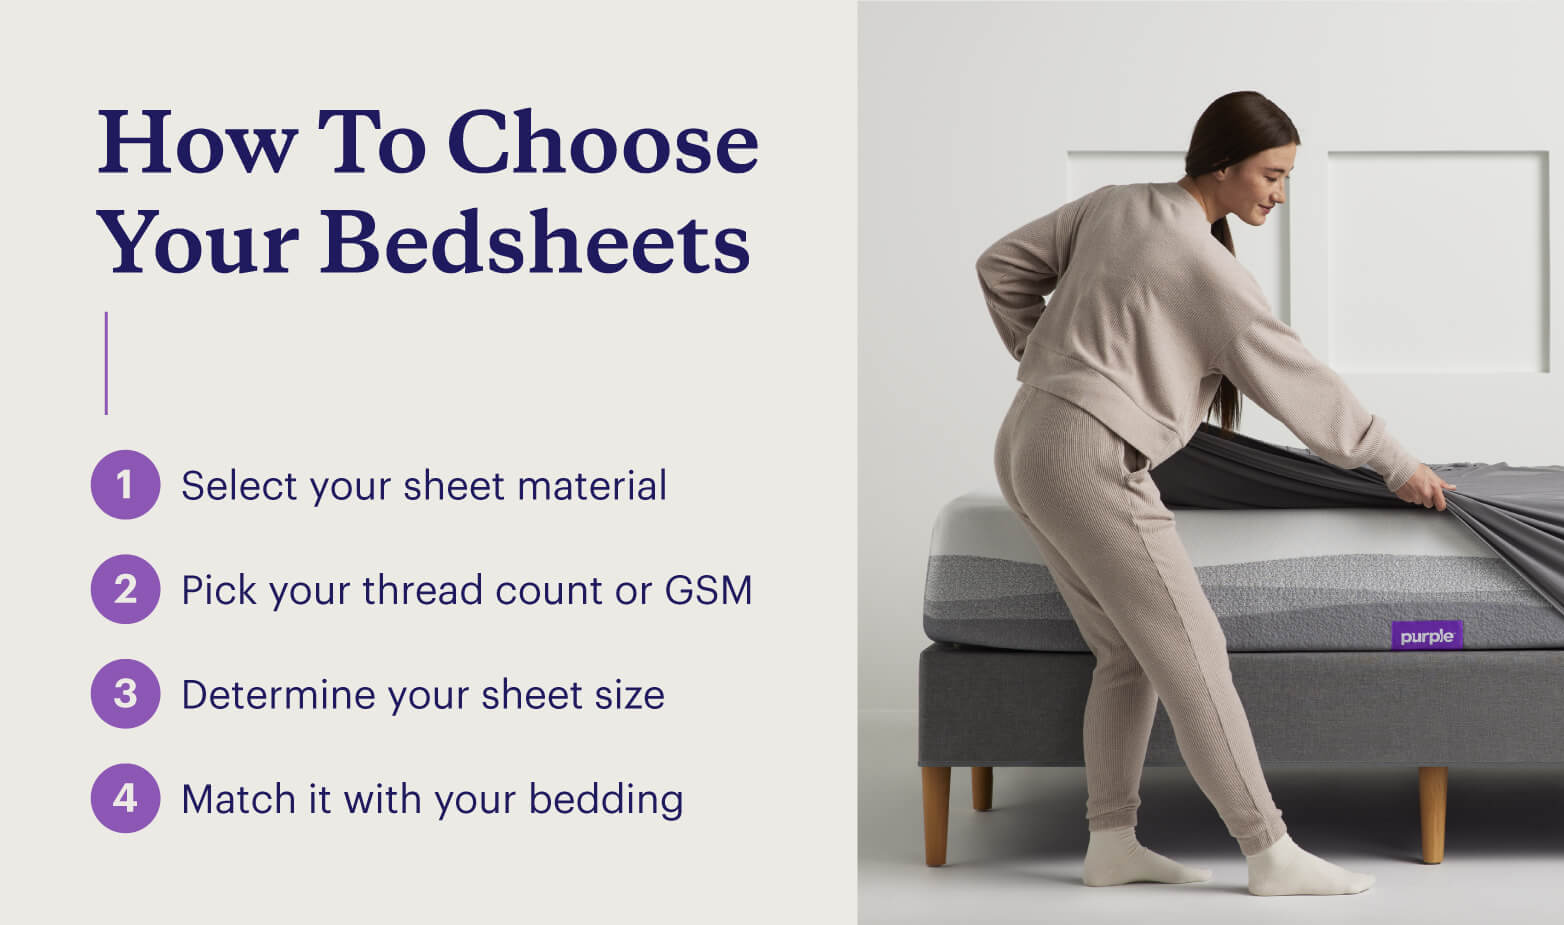 A graphic lists four steps in how to choose bedsheets.